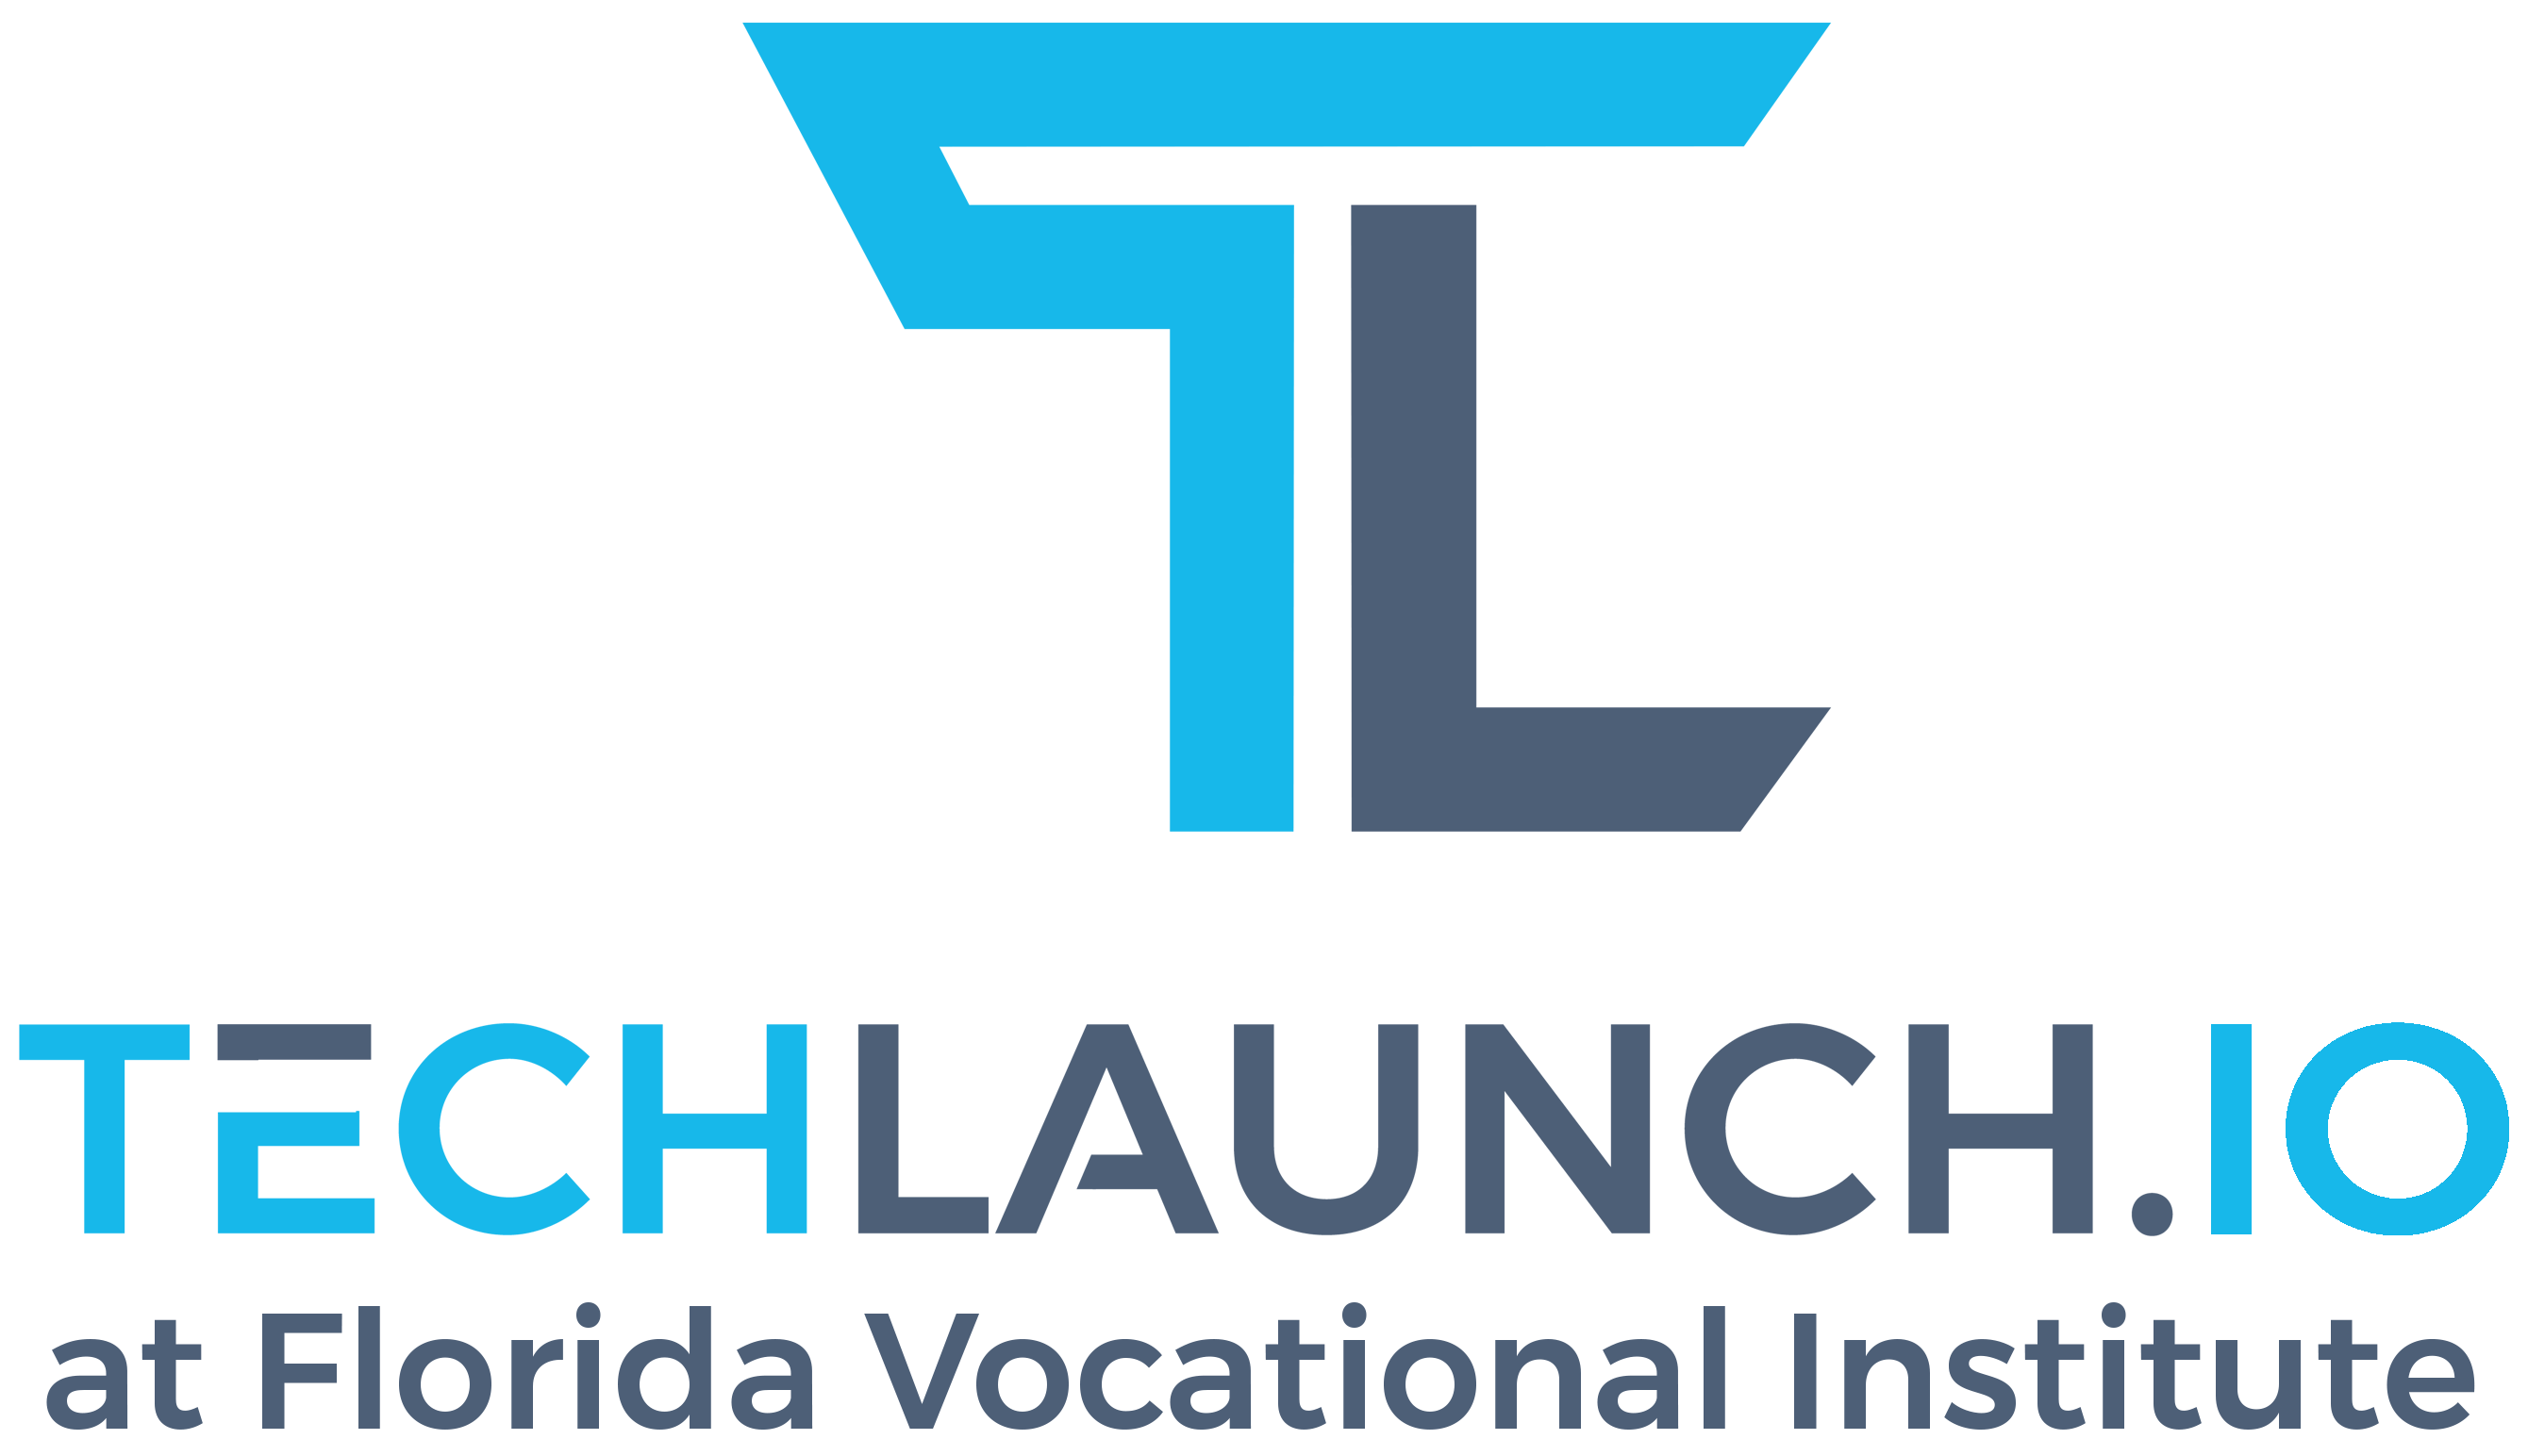 TechLaunch Coding Bootcamp, a Doral Chamber of Commerce member.